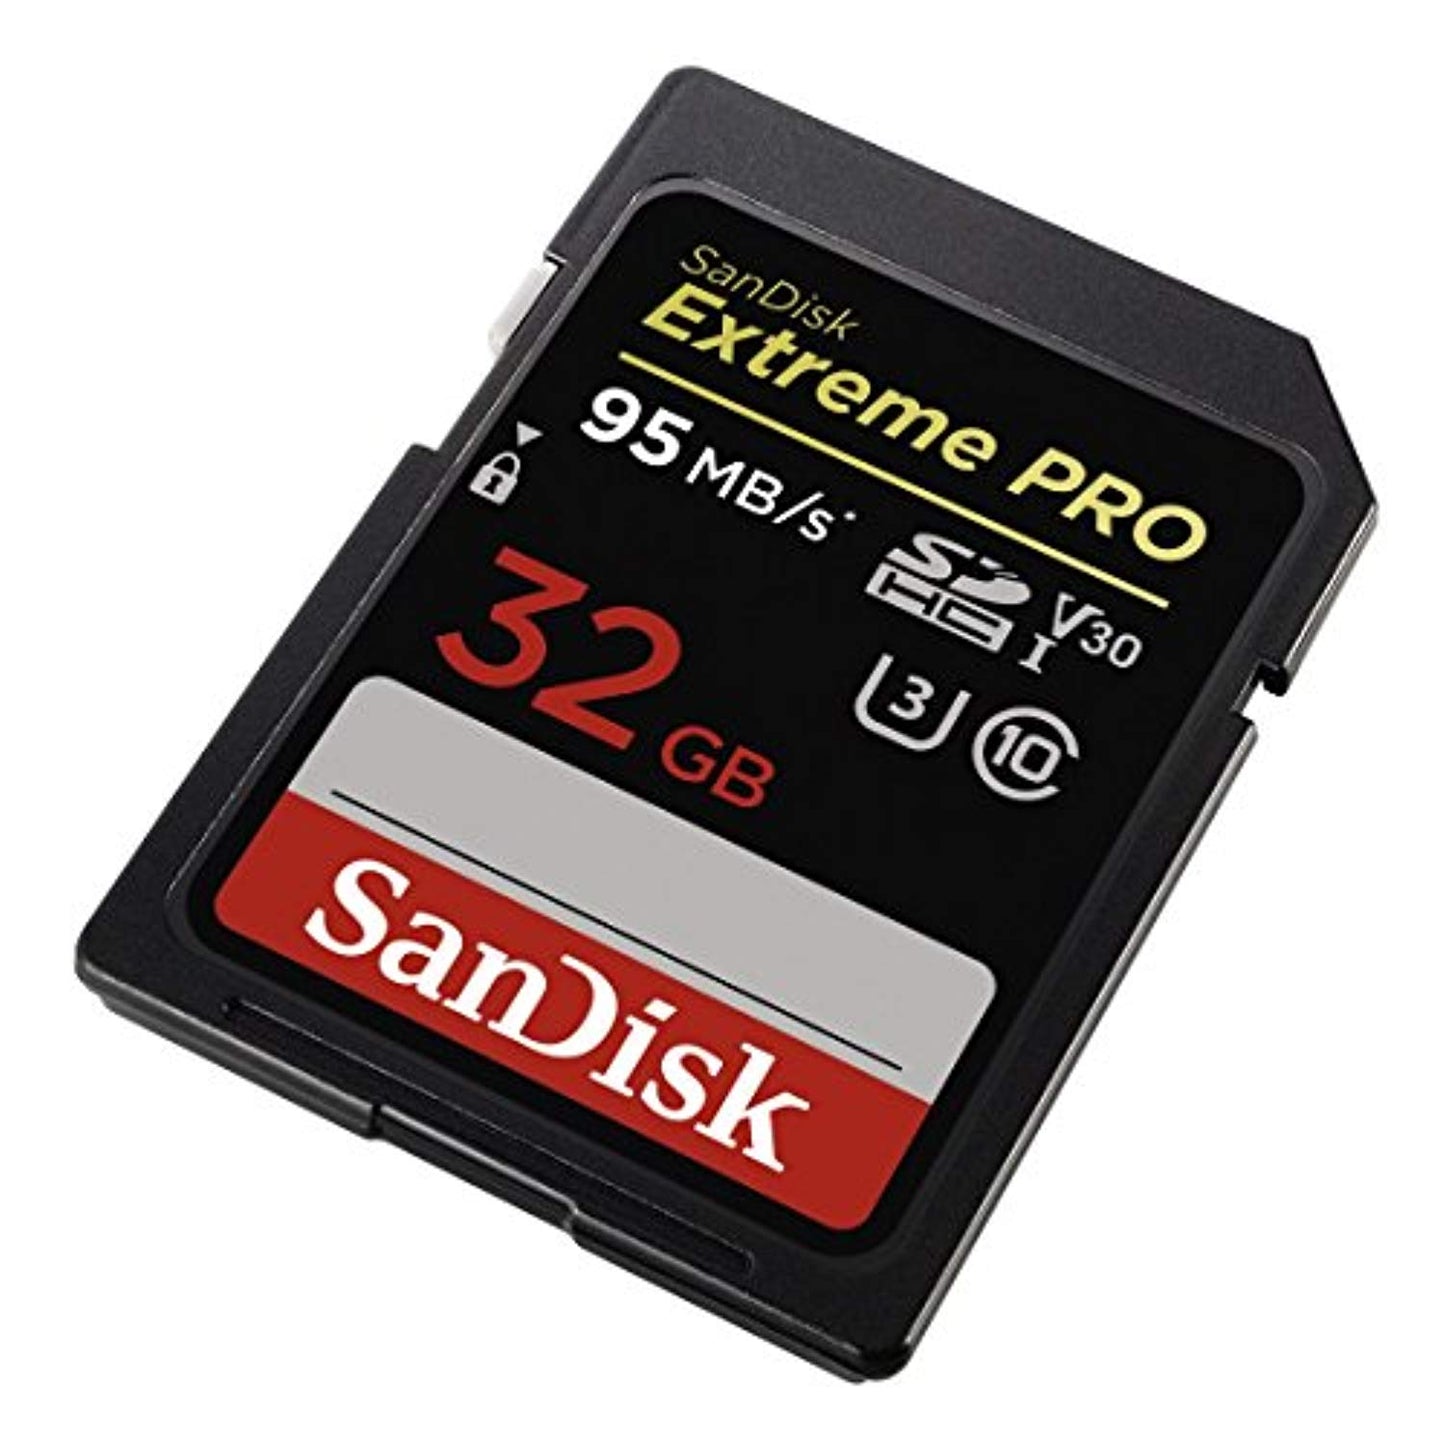 SanDisk Extreme PRO 32 GB SDHC Memory Card - Offer Games